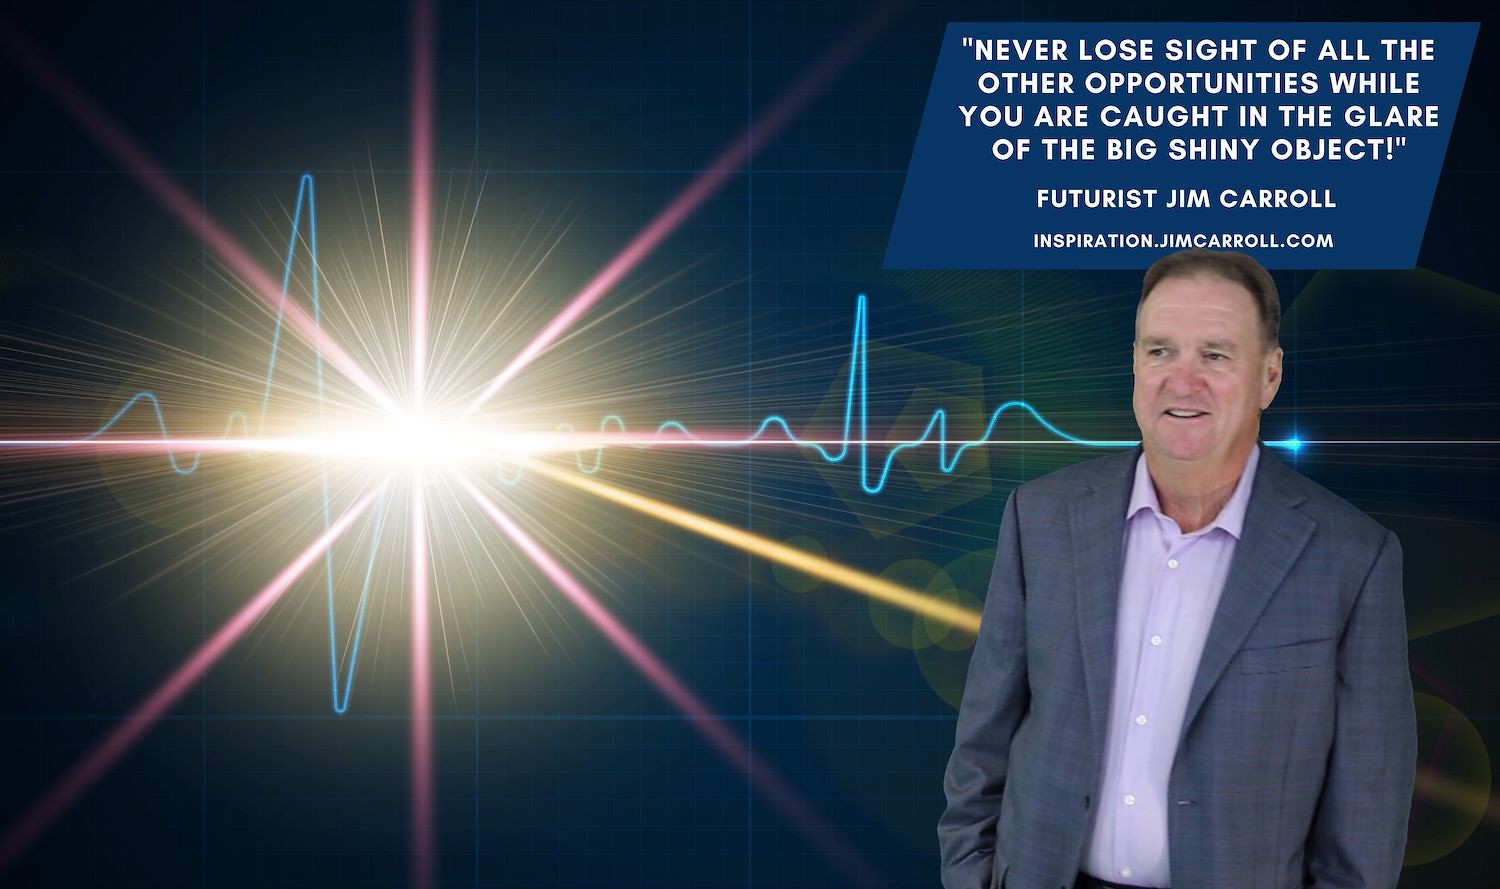 Daily Inspiration: "Never lose sight of all the other opportunities while you are caught in the glare of the big shiny object!" - Futurist Jim Carroll